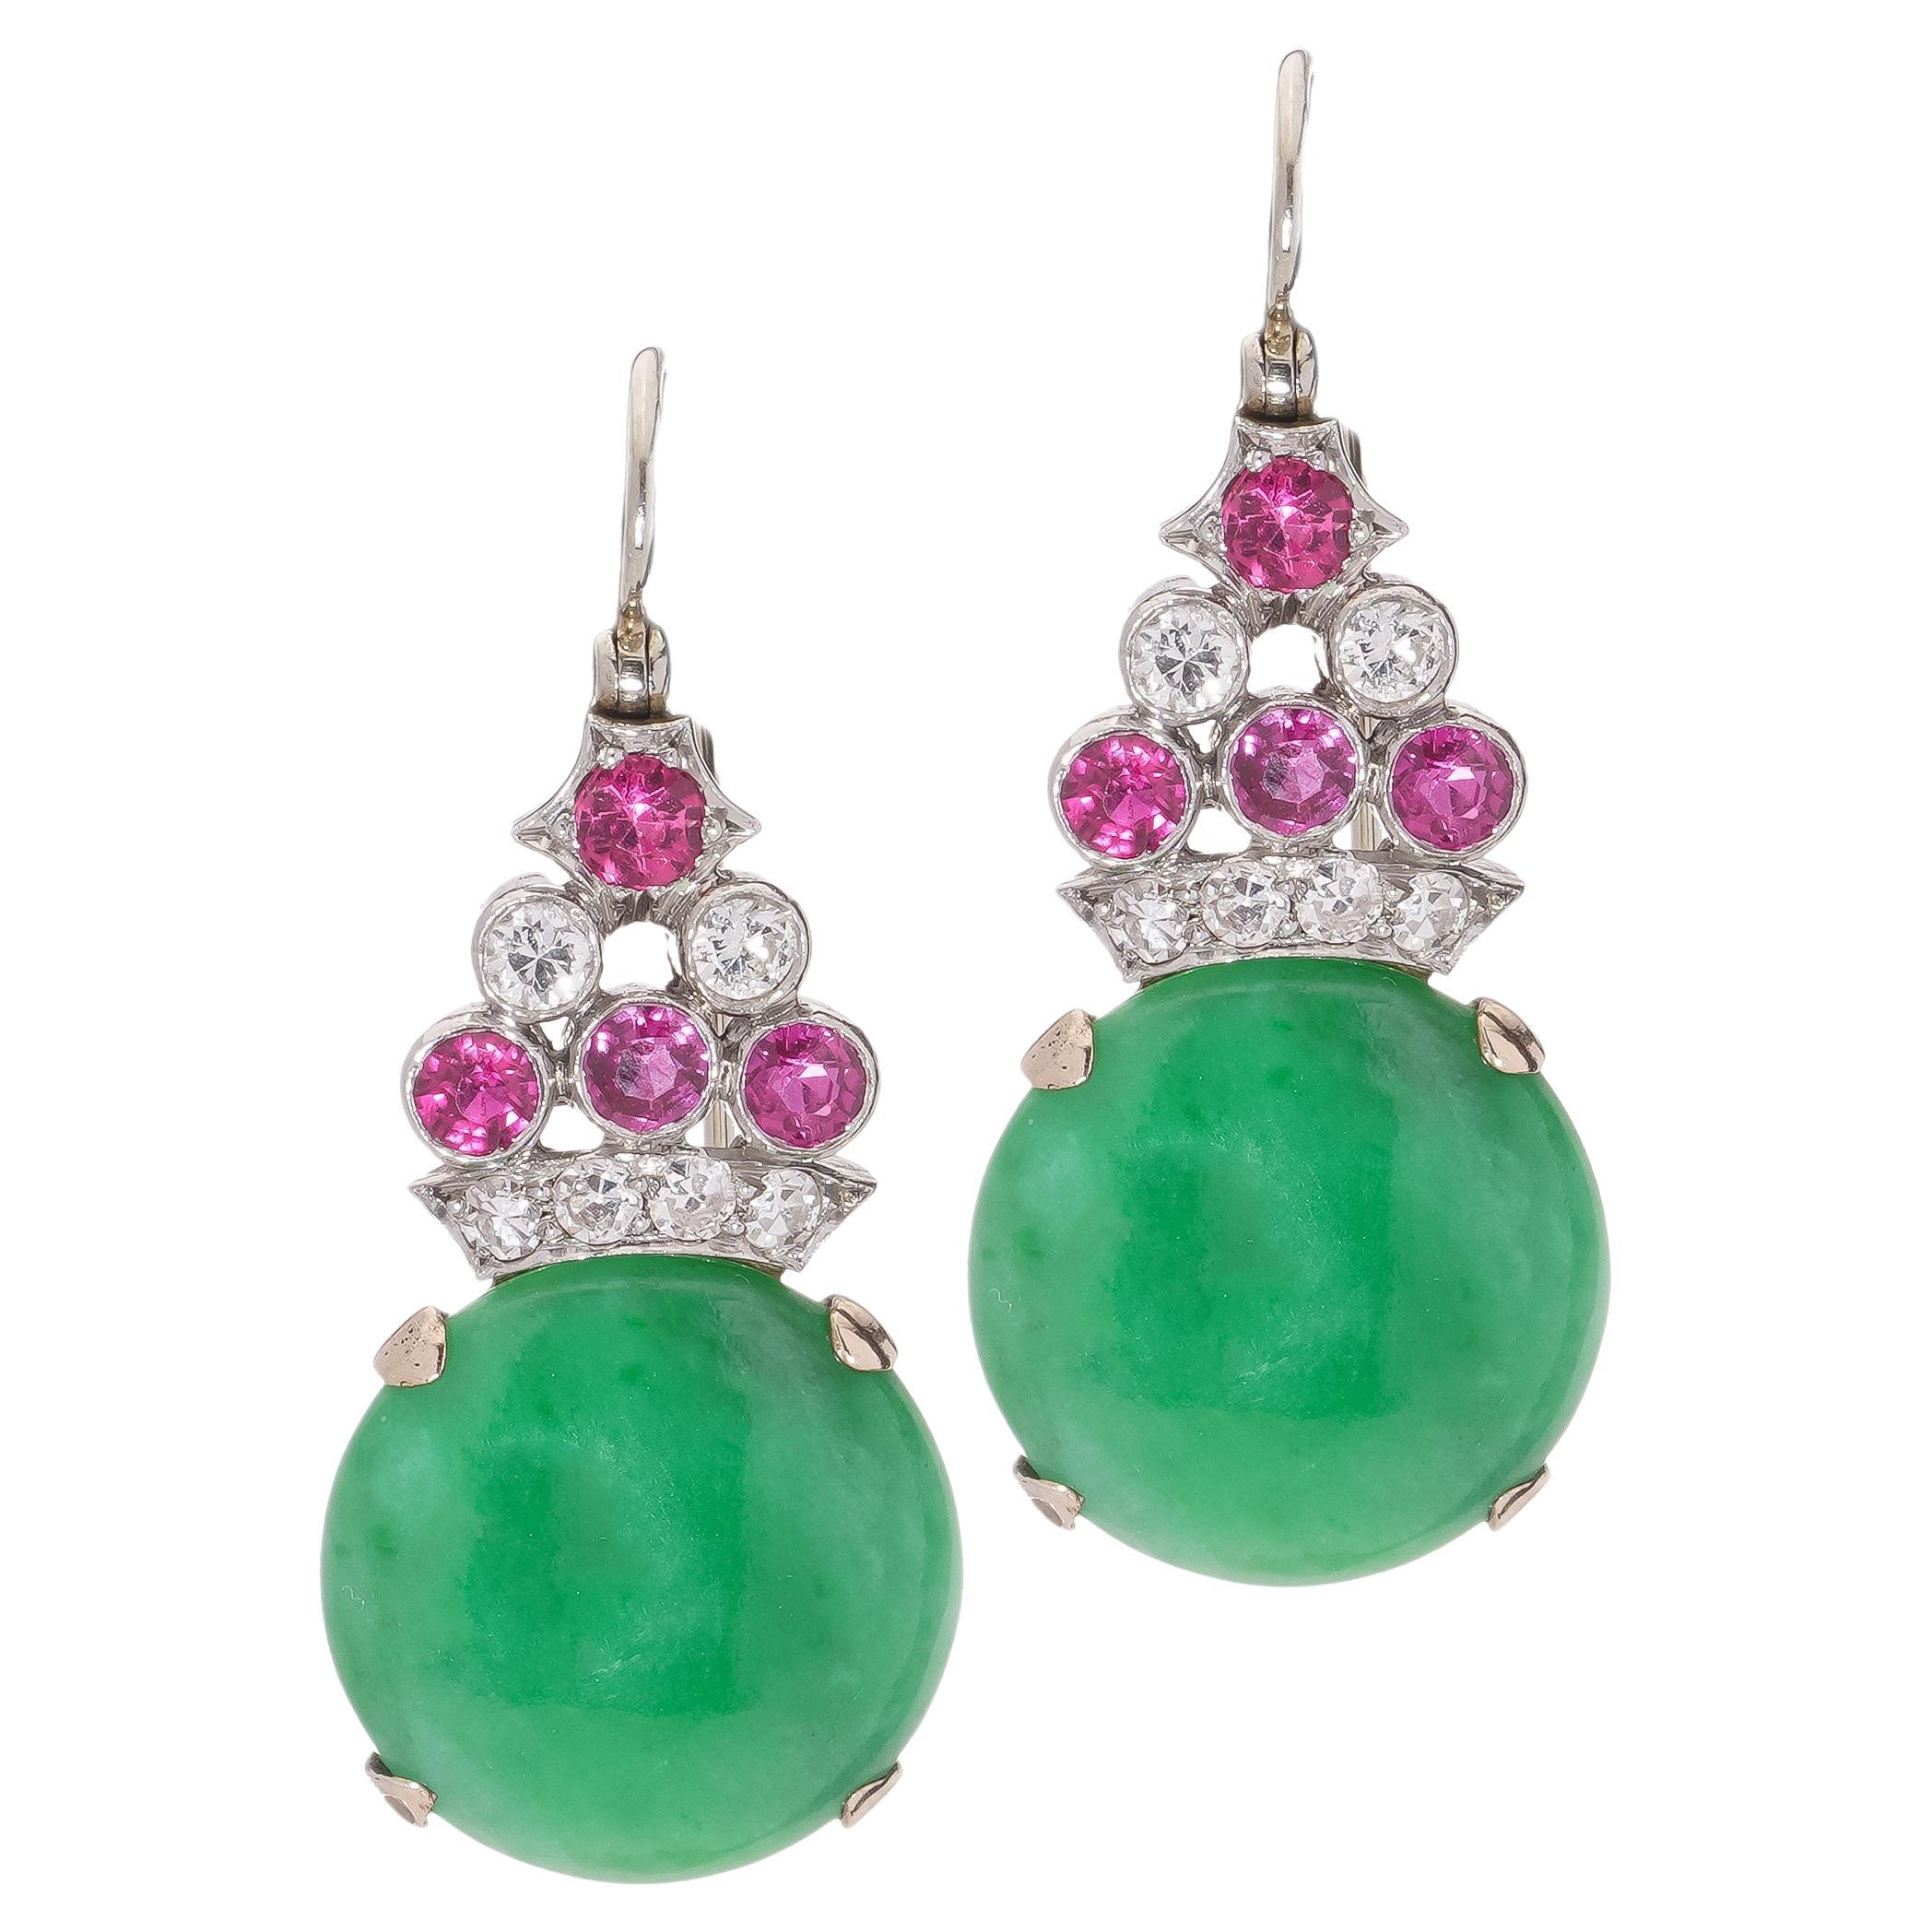 Vintage Platinum and 9kt. gold hook earrings with Jadeite, diamonds, and rubies.